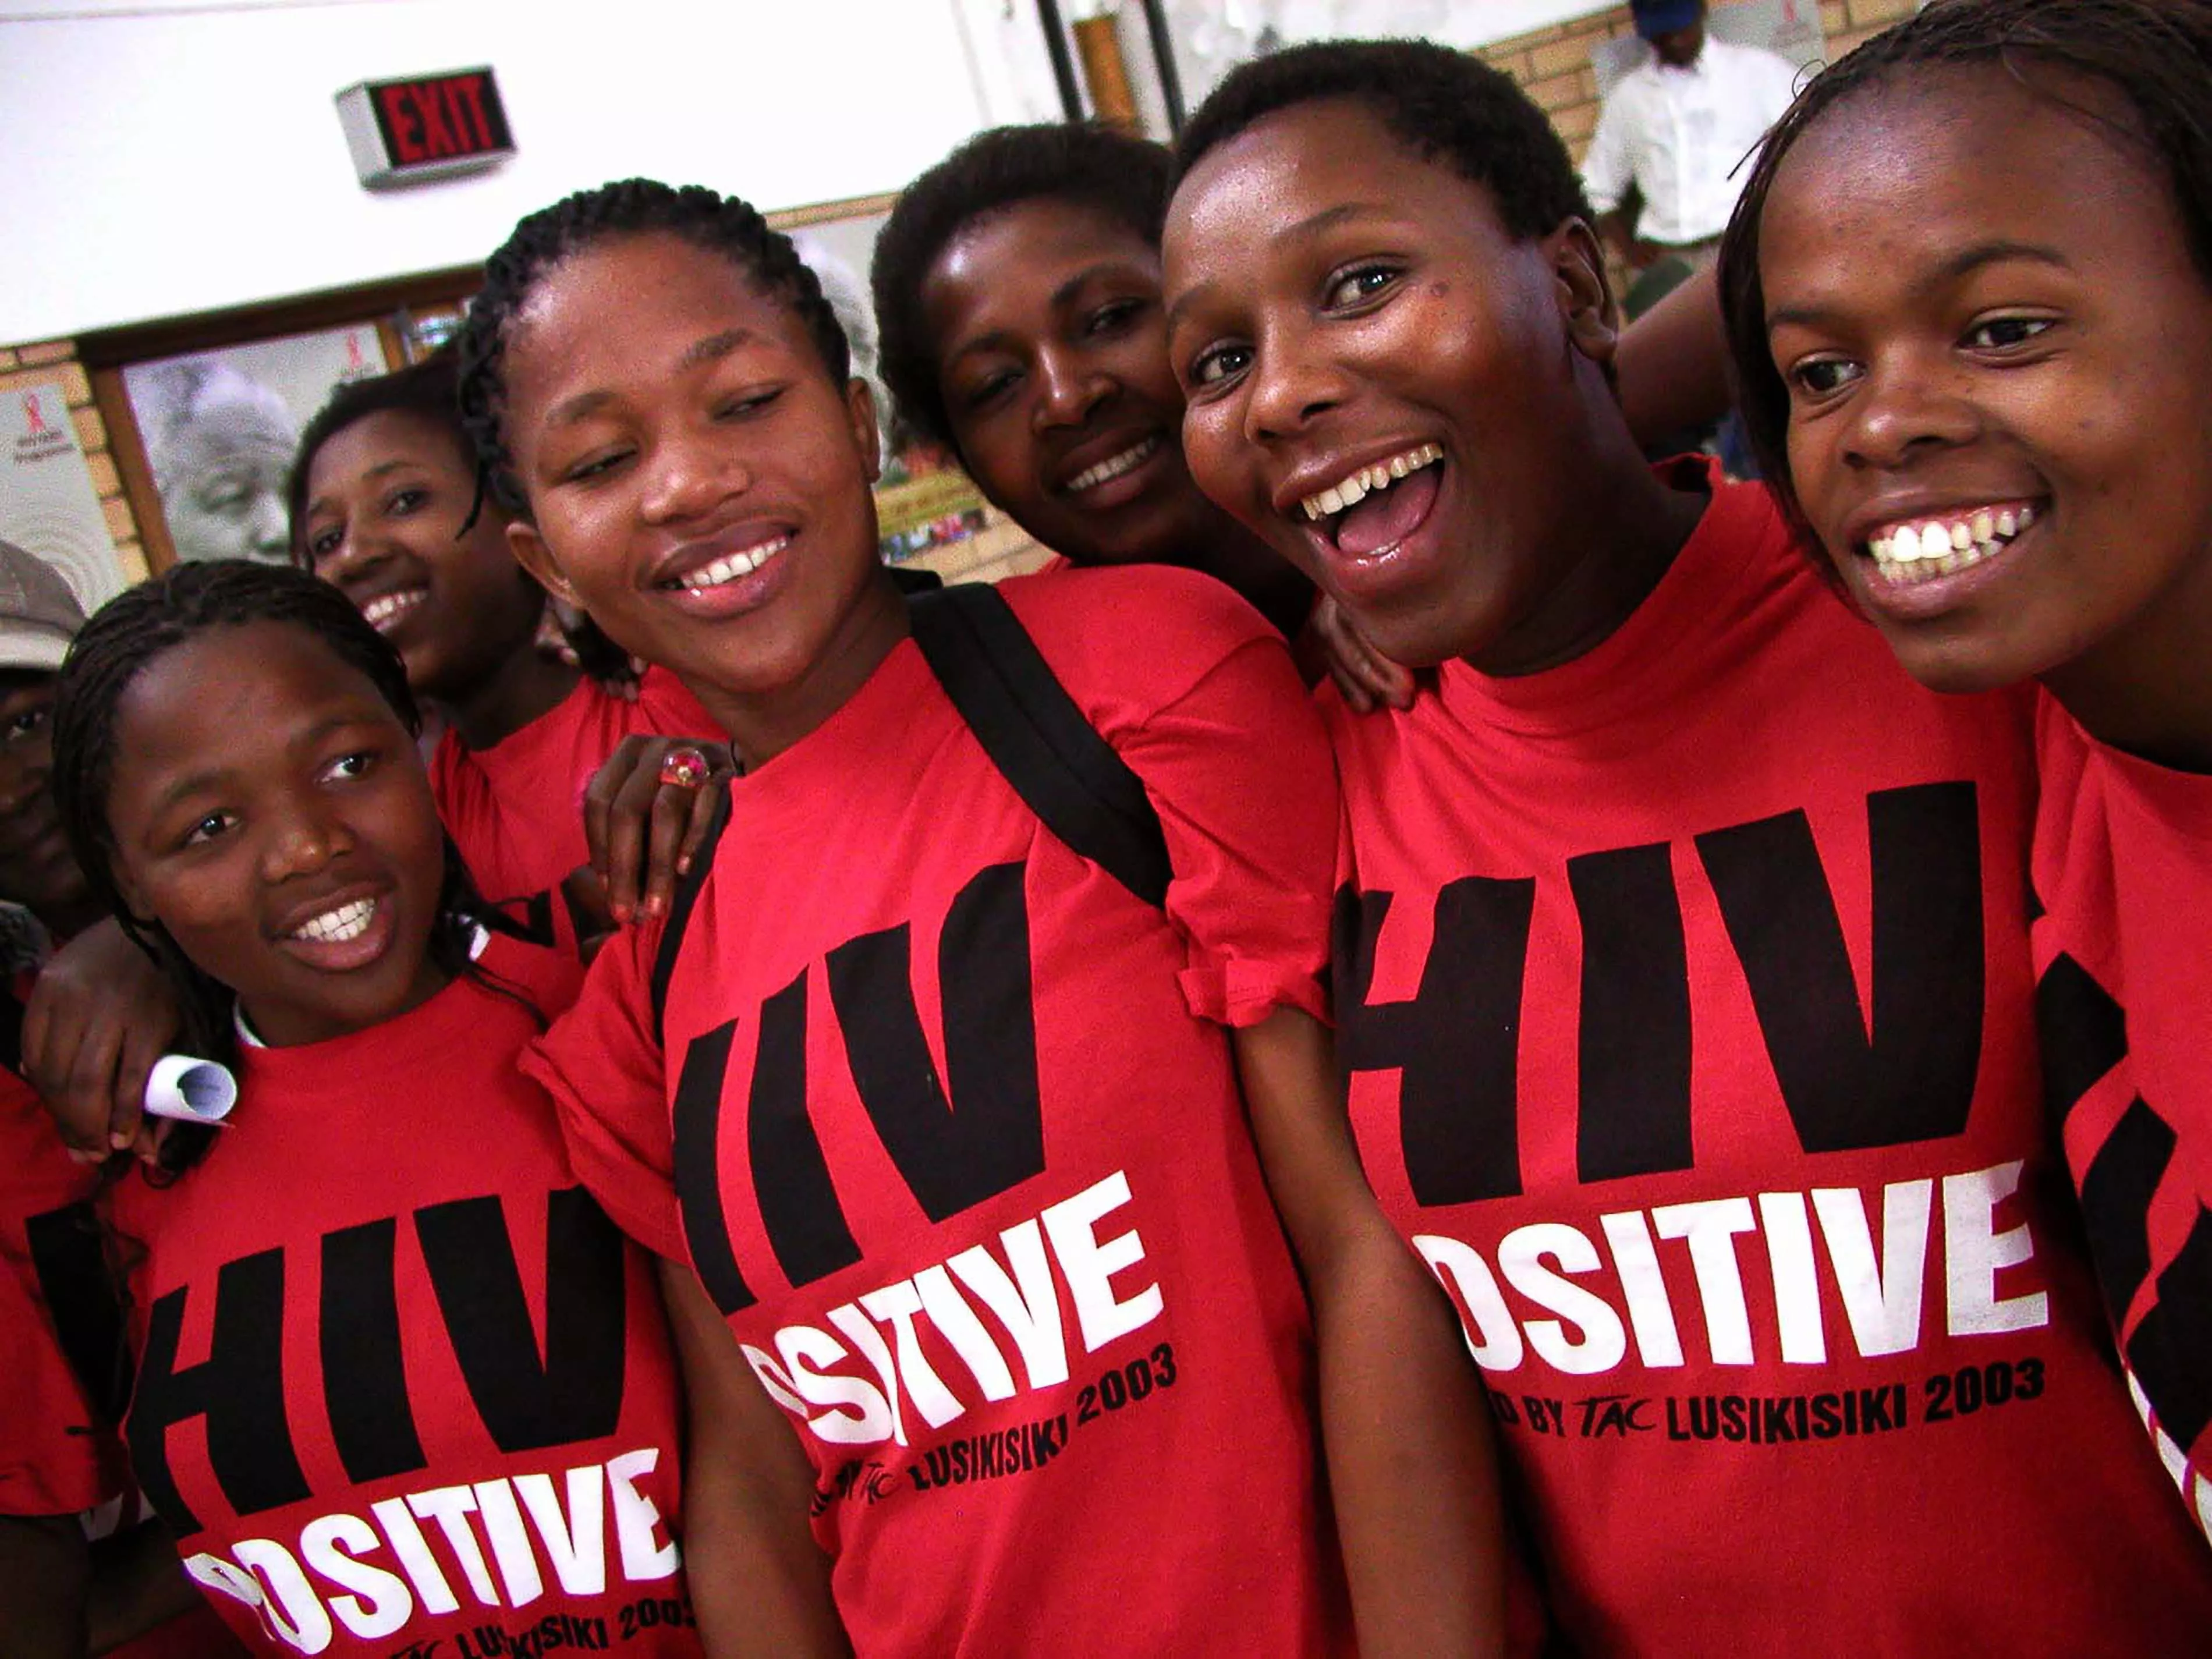 Treatment Action Campaign (TAC) activists wear "HIV Positive" t-shirts during Mr Mandela's visit to Siyaphila la HIV Treatment Program hosted by MSF and the Nelson Mandela Foundation. The event was held at the Lusikiki Teacher's Training College.